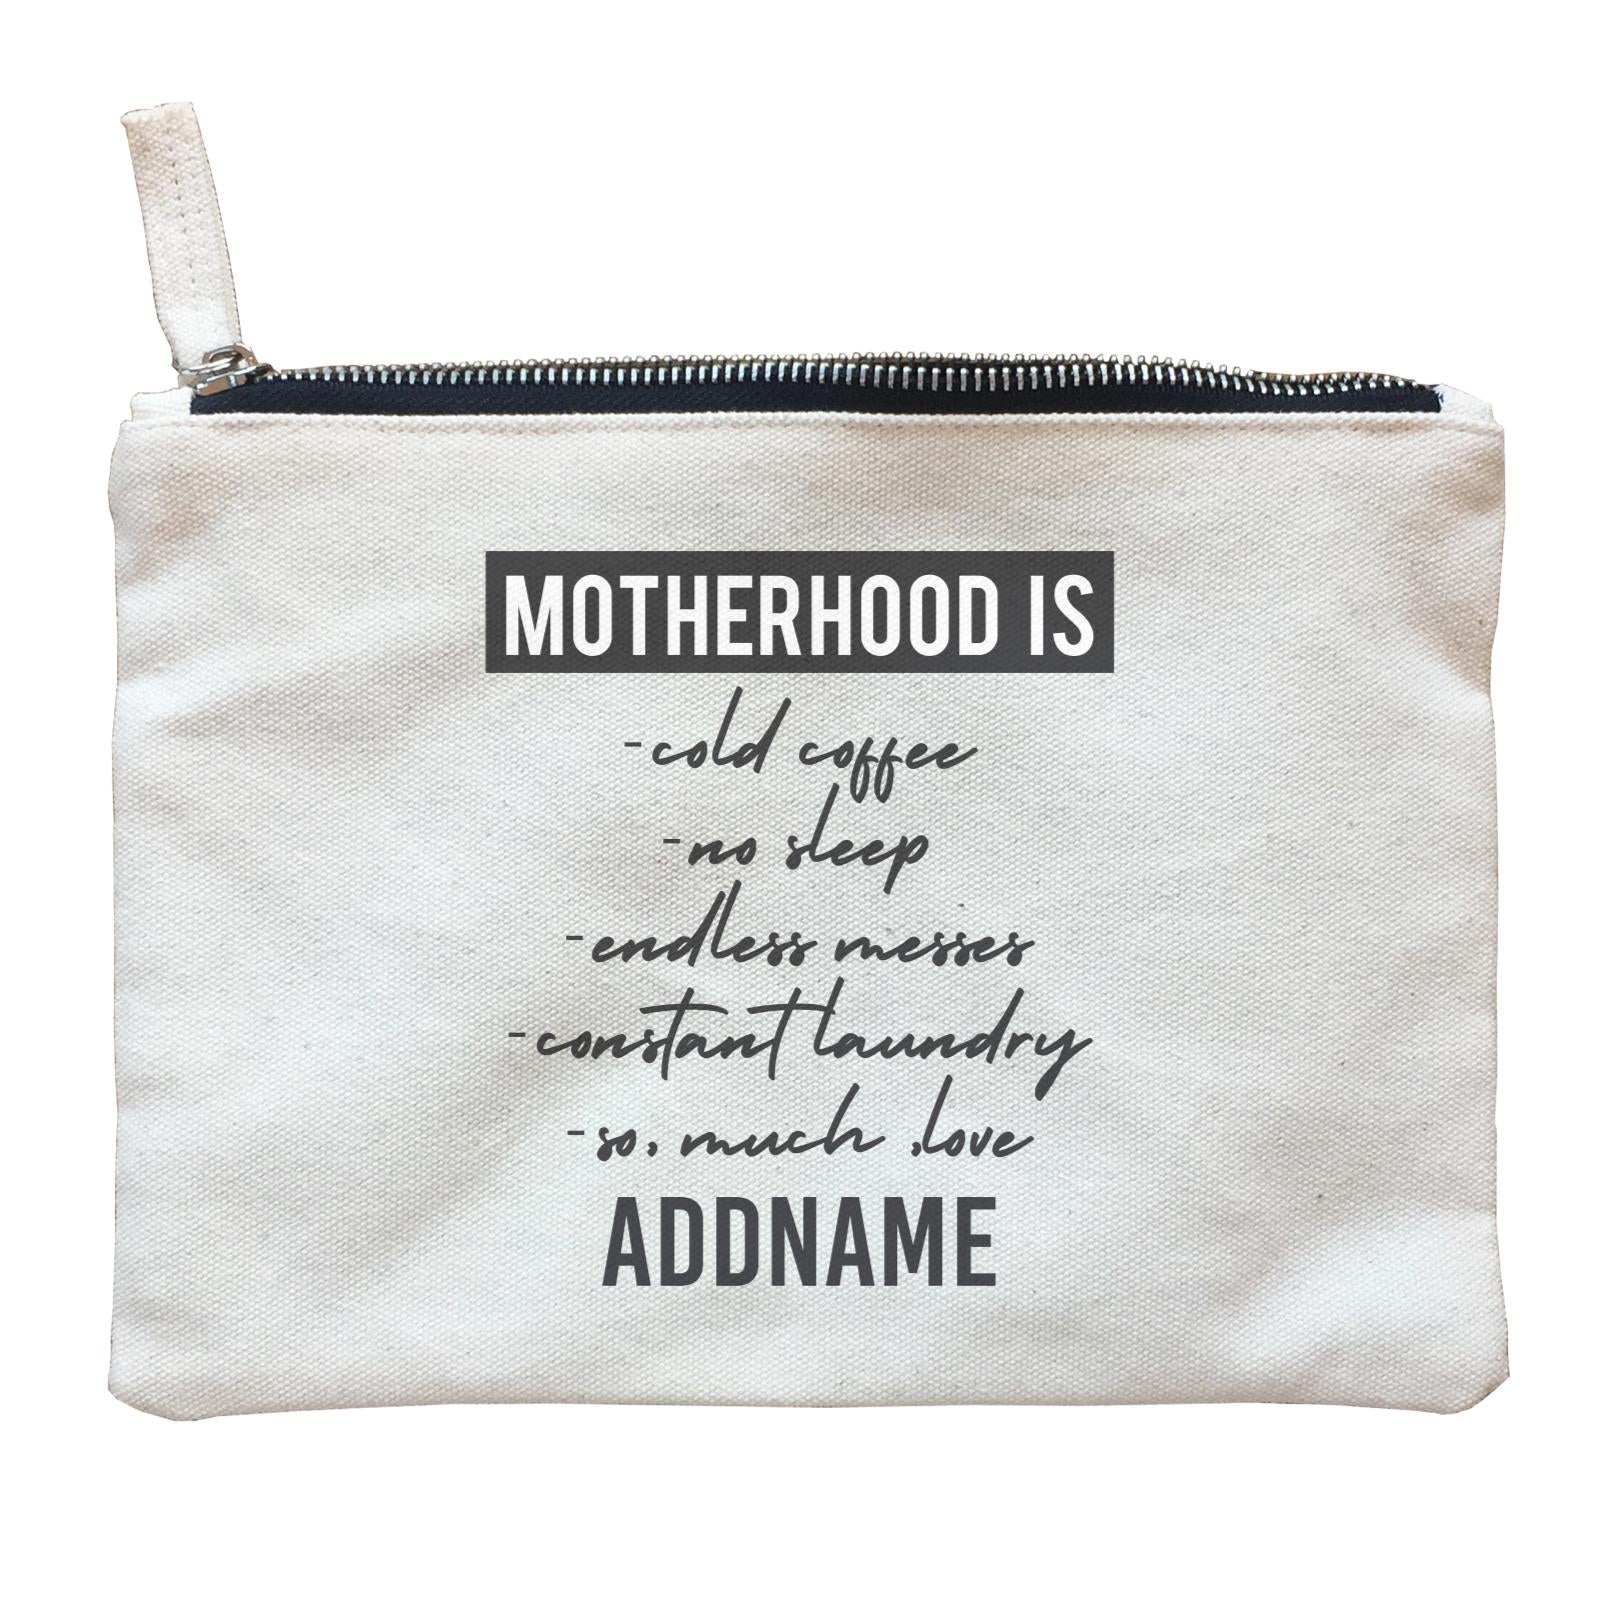 Funny Mom Quotes Motherhood Is So Much Love Addname Zipper Pouch